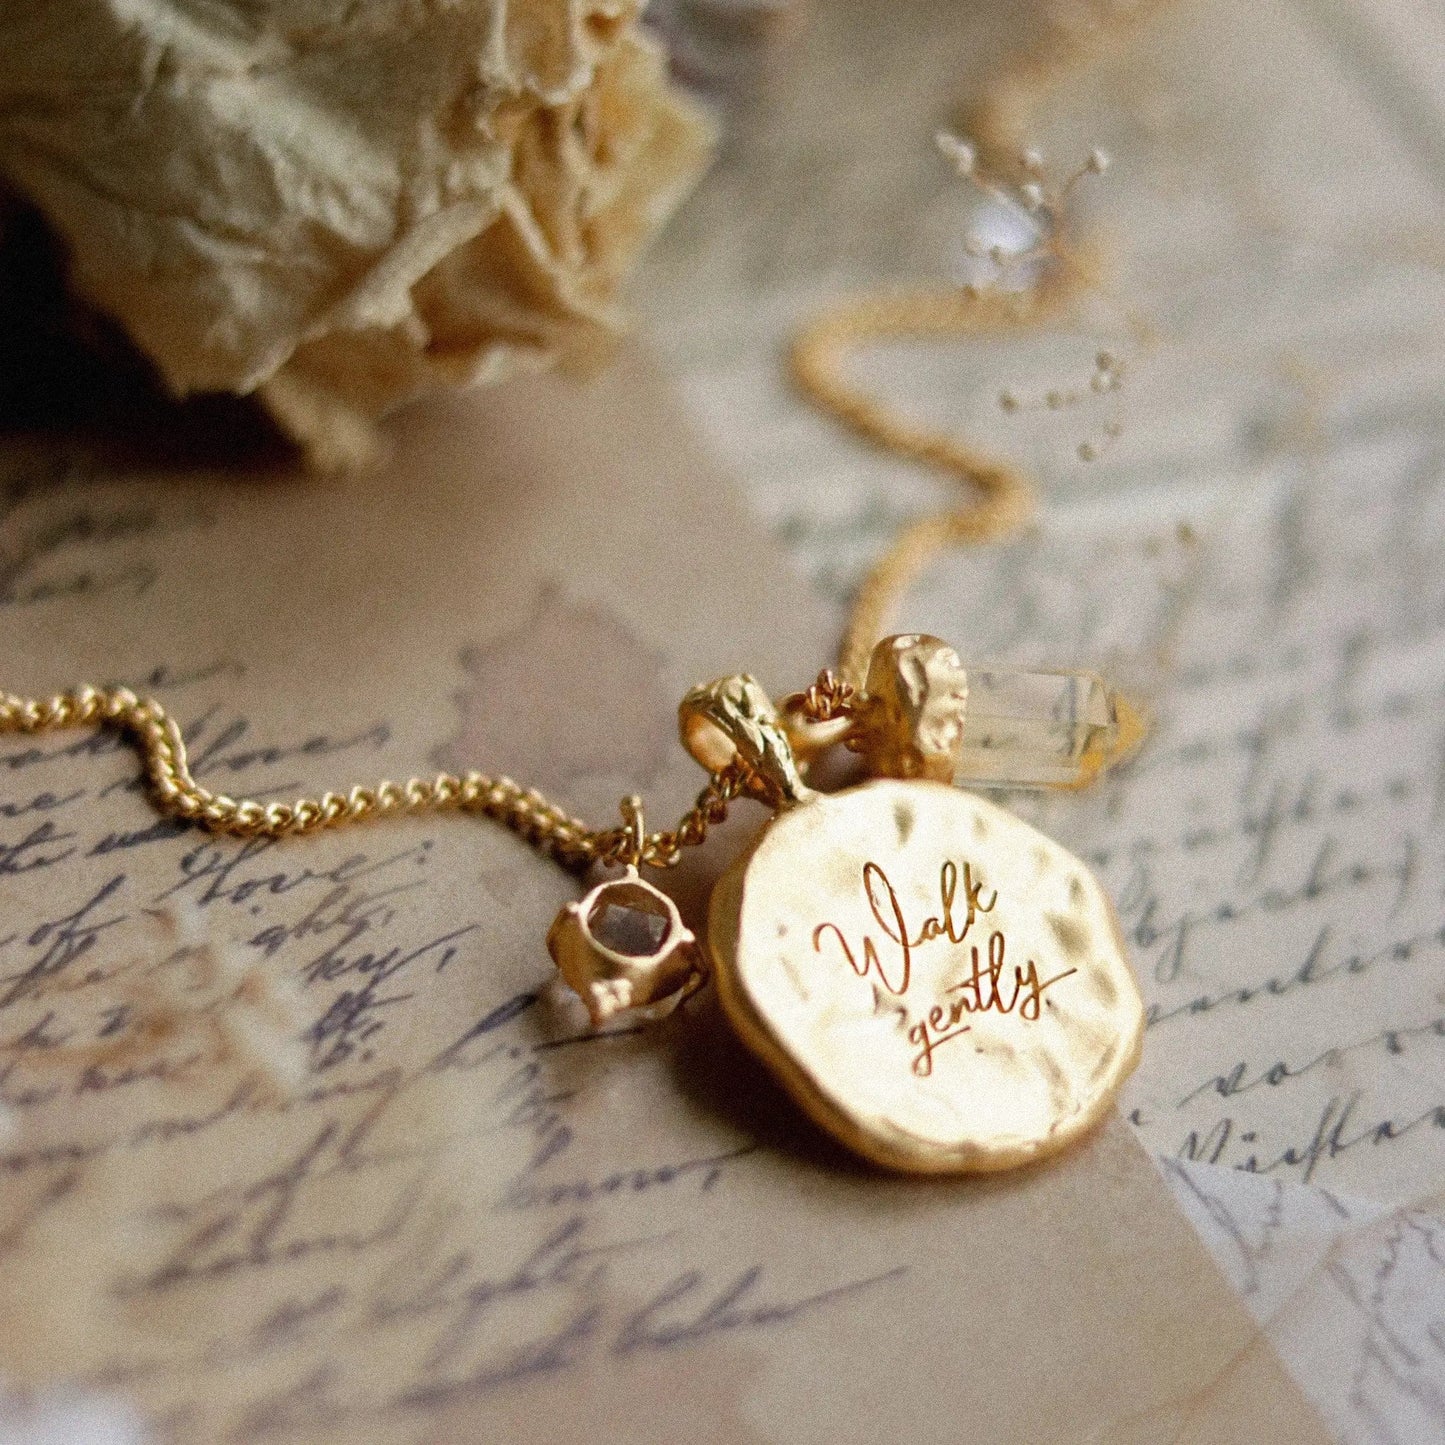 Hold me with care necklace